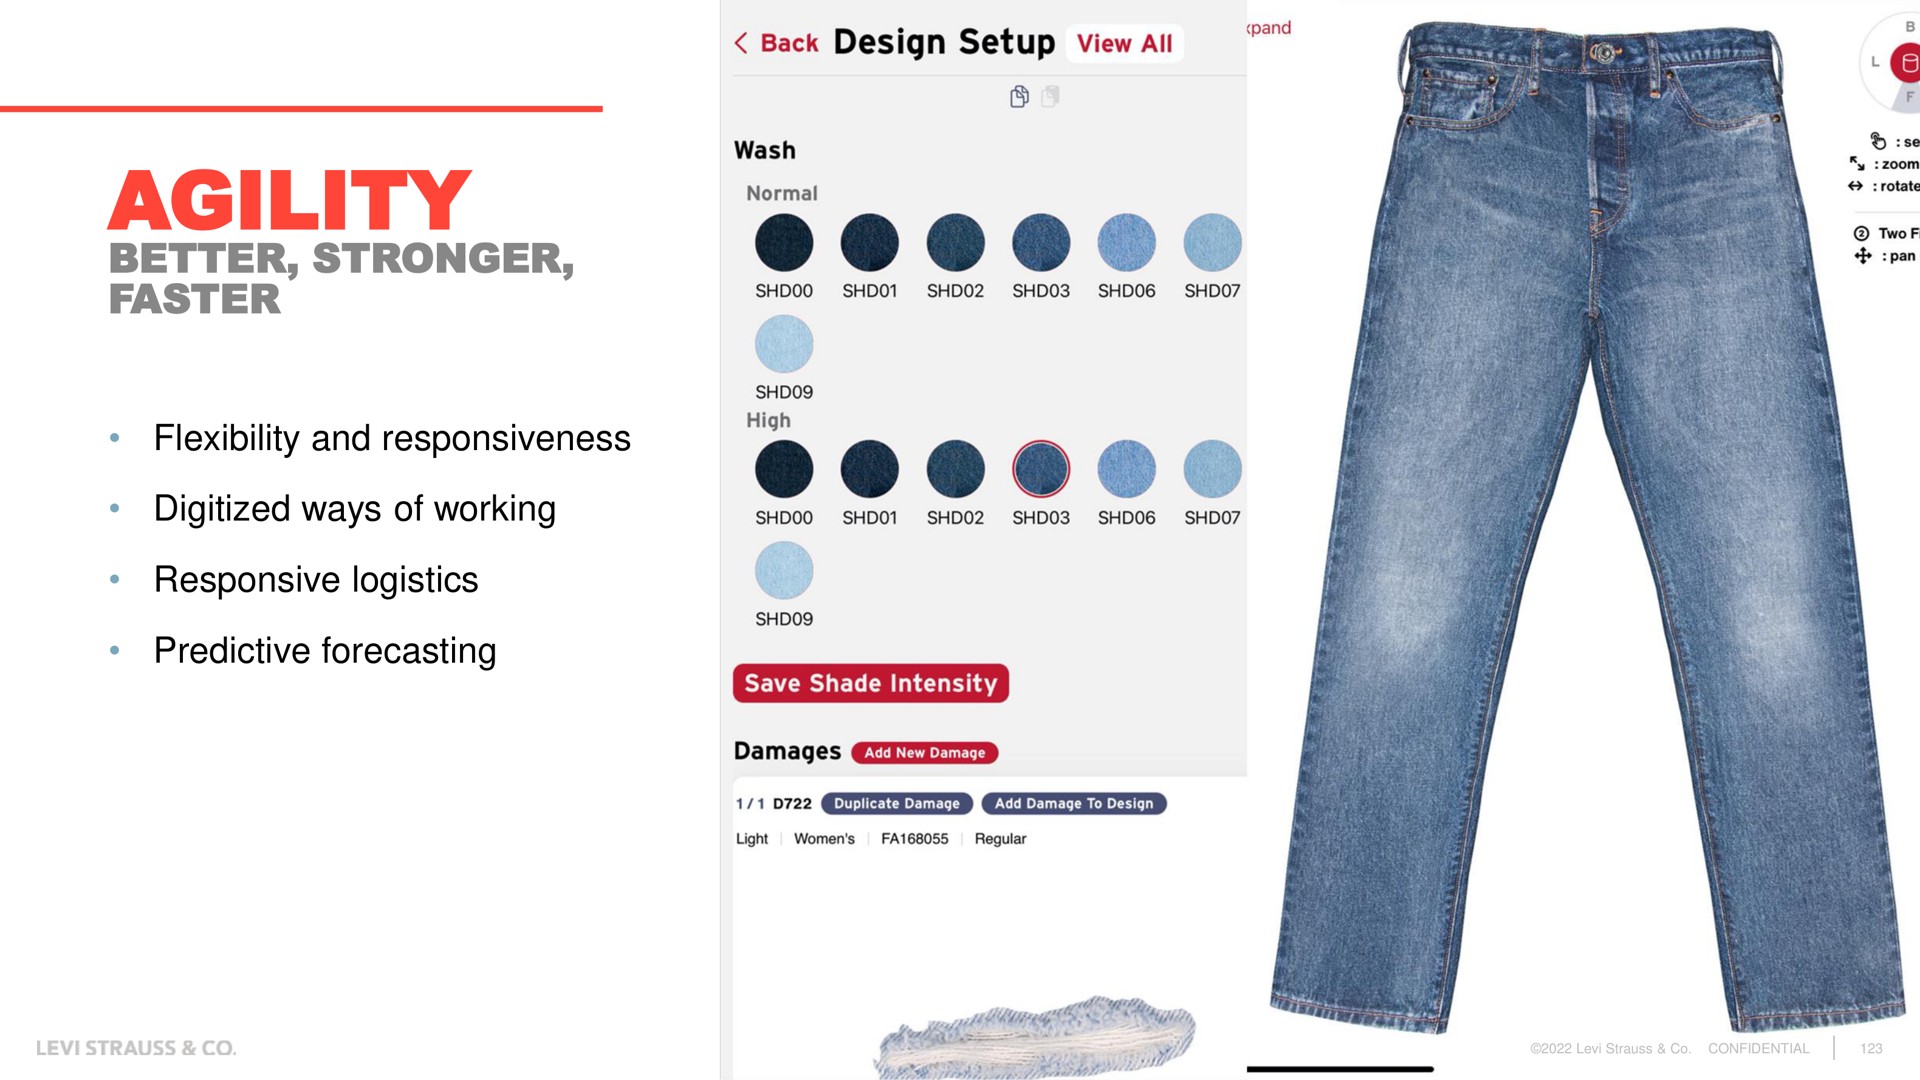 agility better faster back design setup view all flexibility and responsiveness digitized ways of working responsive logistics predictive forecasting fie | Levi Strauss